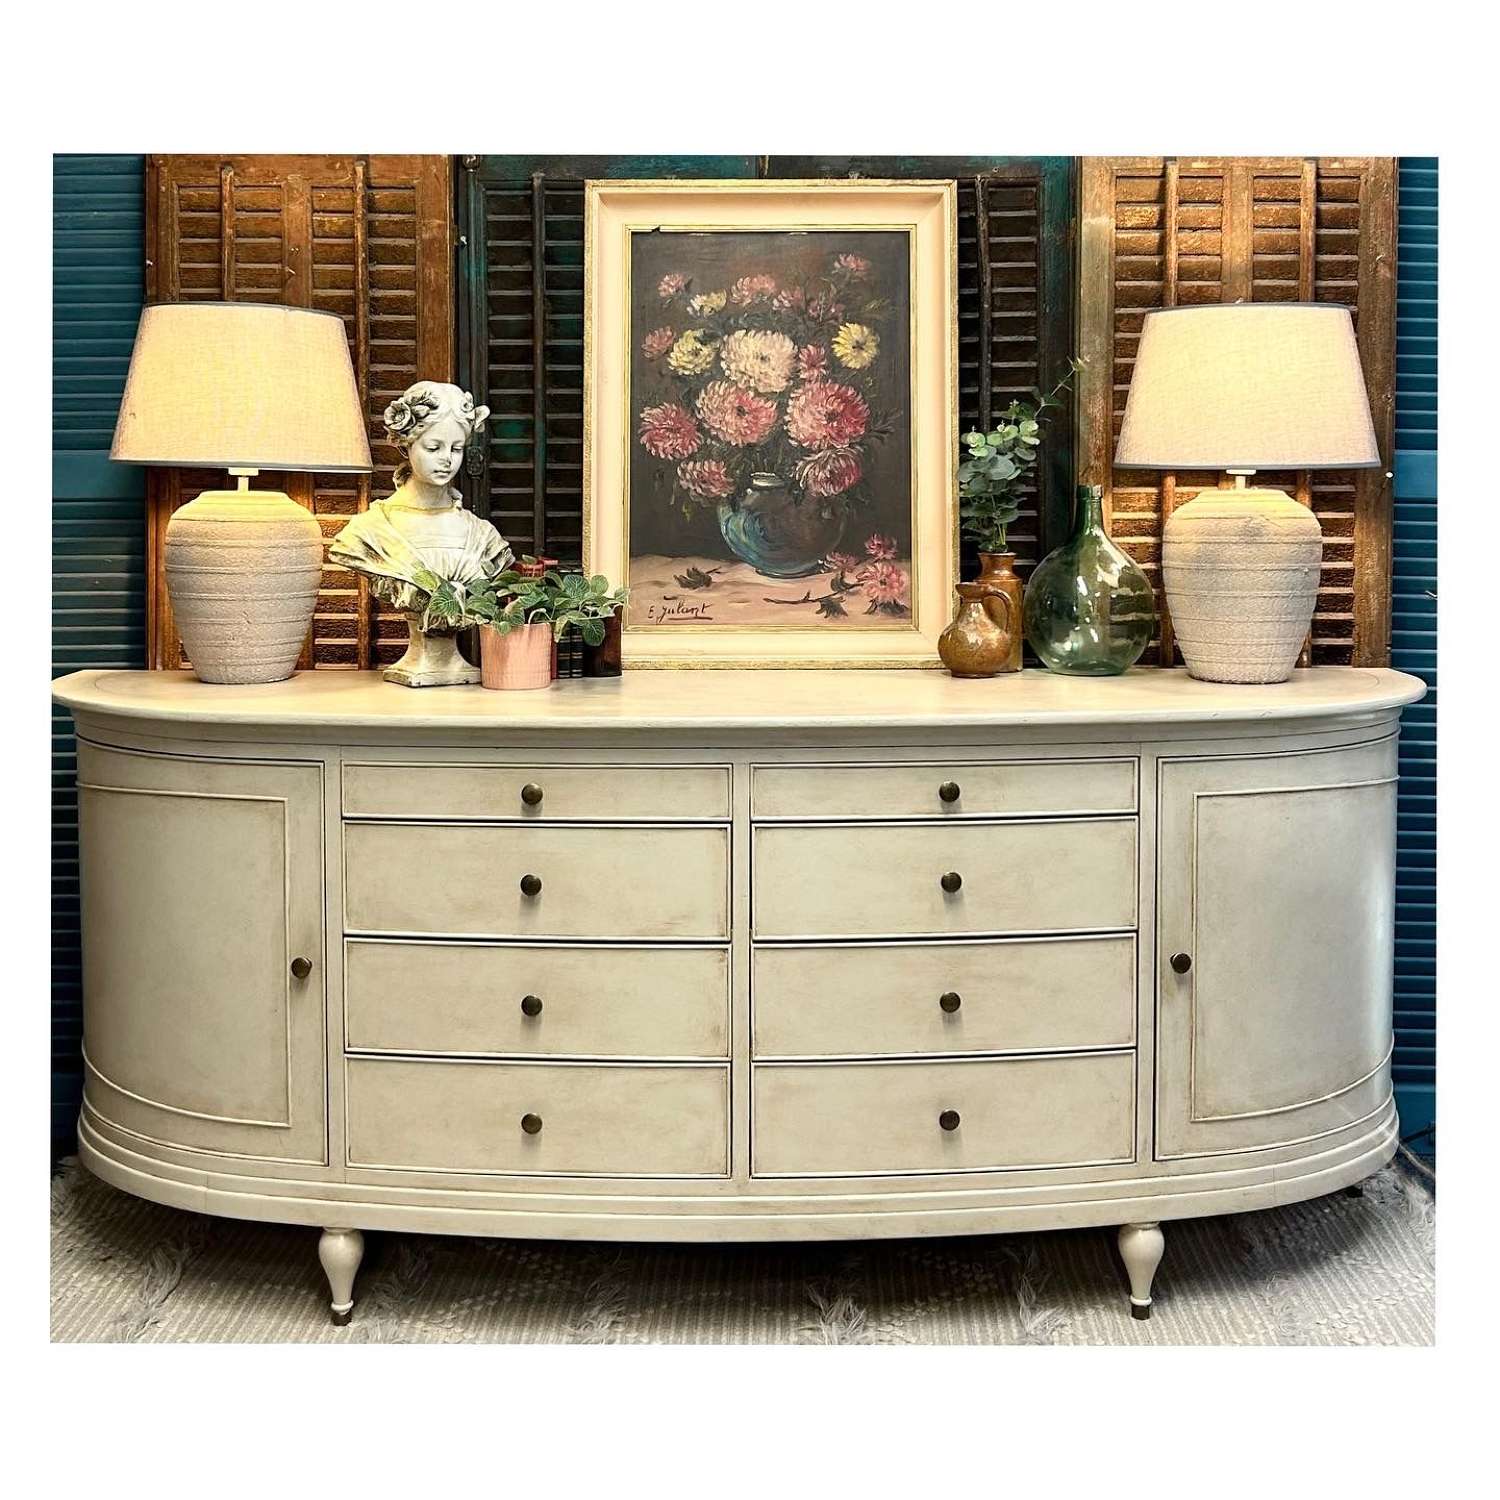 Gustavian Painted Large Curved Sideboard